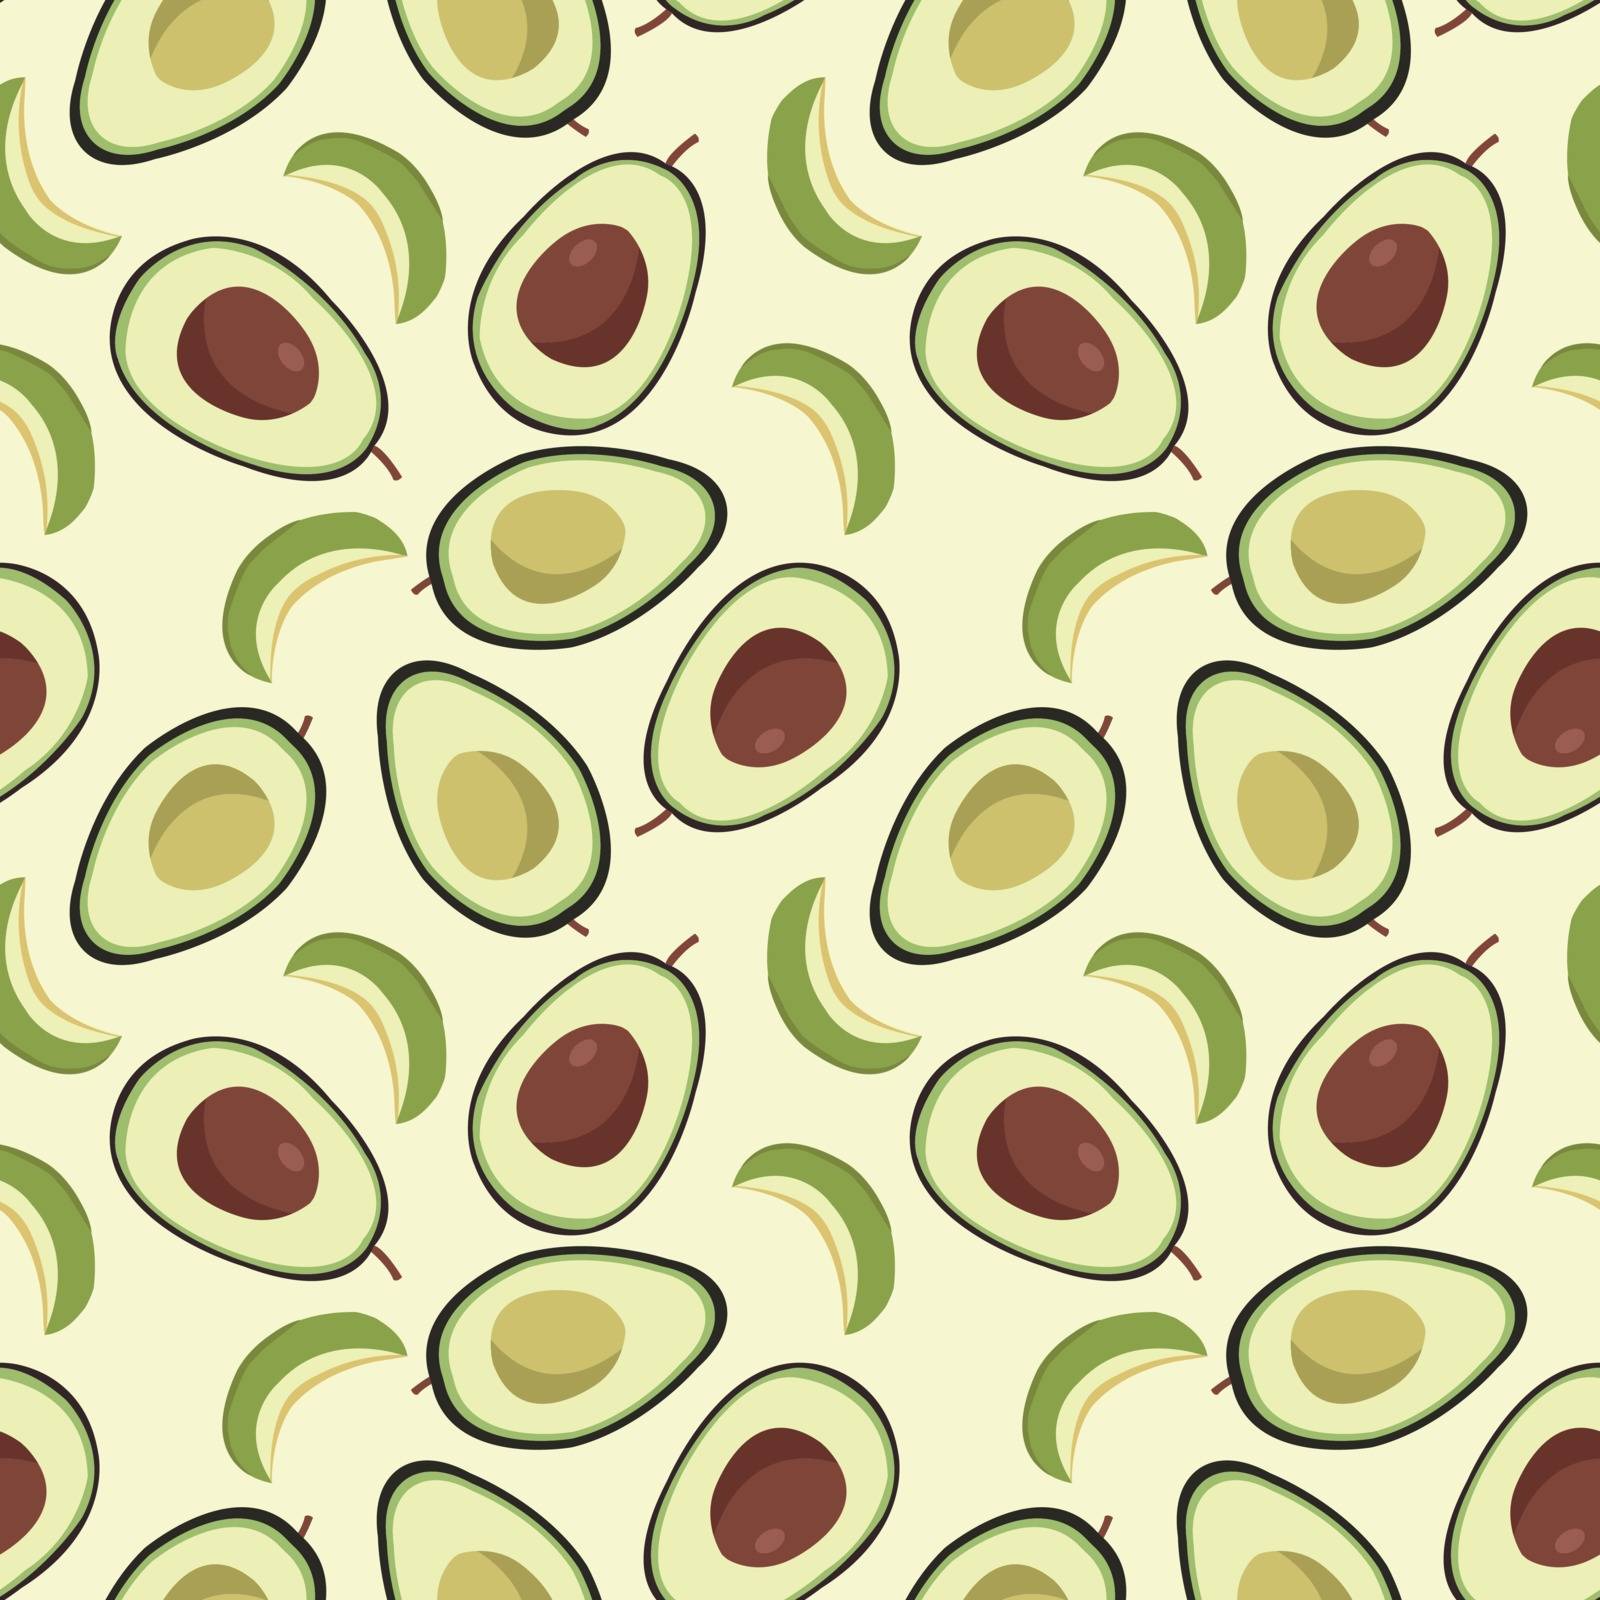  pattern with ripe green avocados.  by Margolana